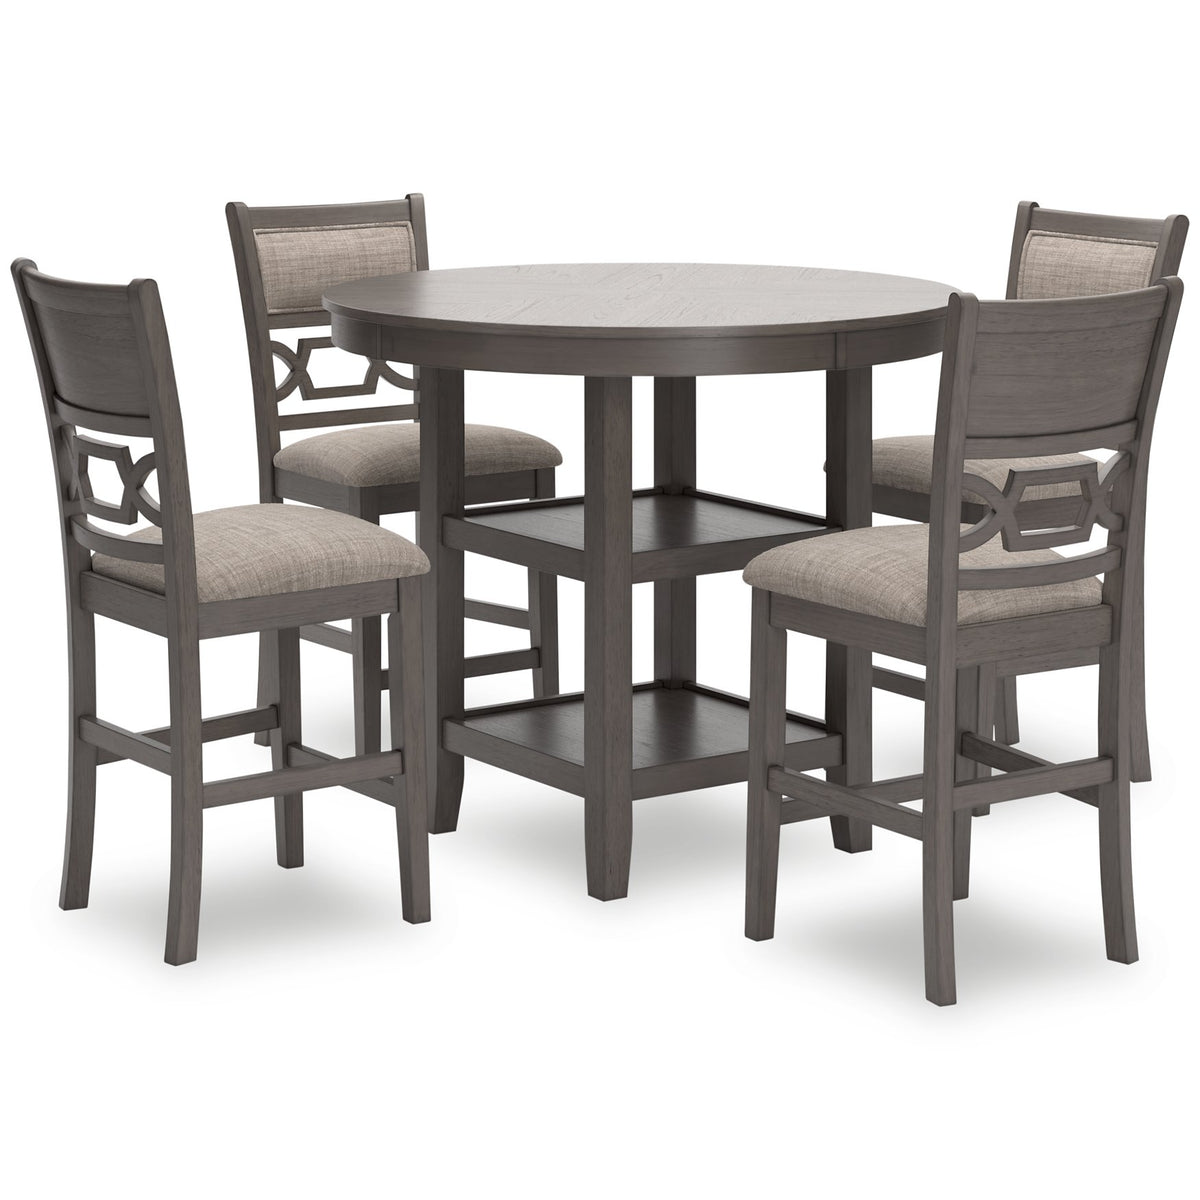 Wrenning Counter Height Dining Table and 4 Barstools (Set of 5)  Las Vegas Furniture Stores